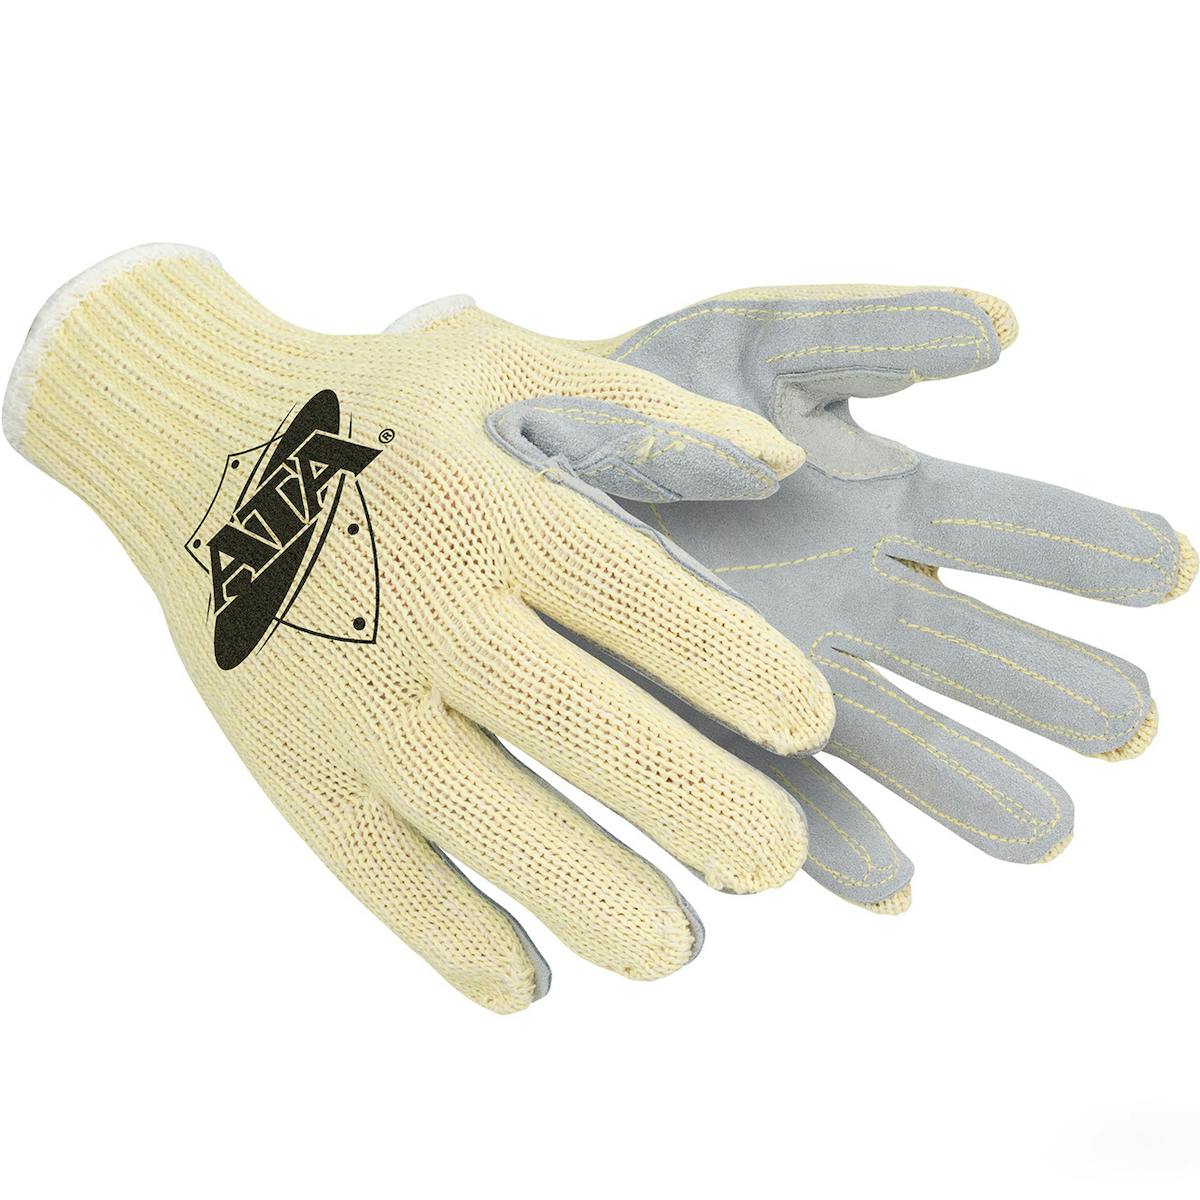 PIP® Seamless Knit ATA® Technology Blended Glove with Split Cowhide Leather Palm - Knit Wrist (MATA30-BH)_0